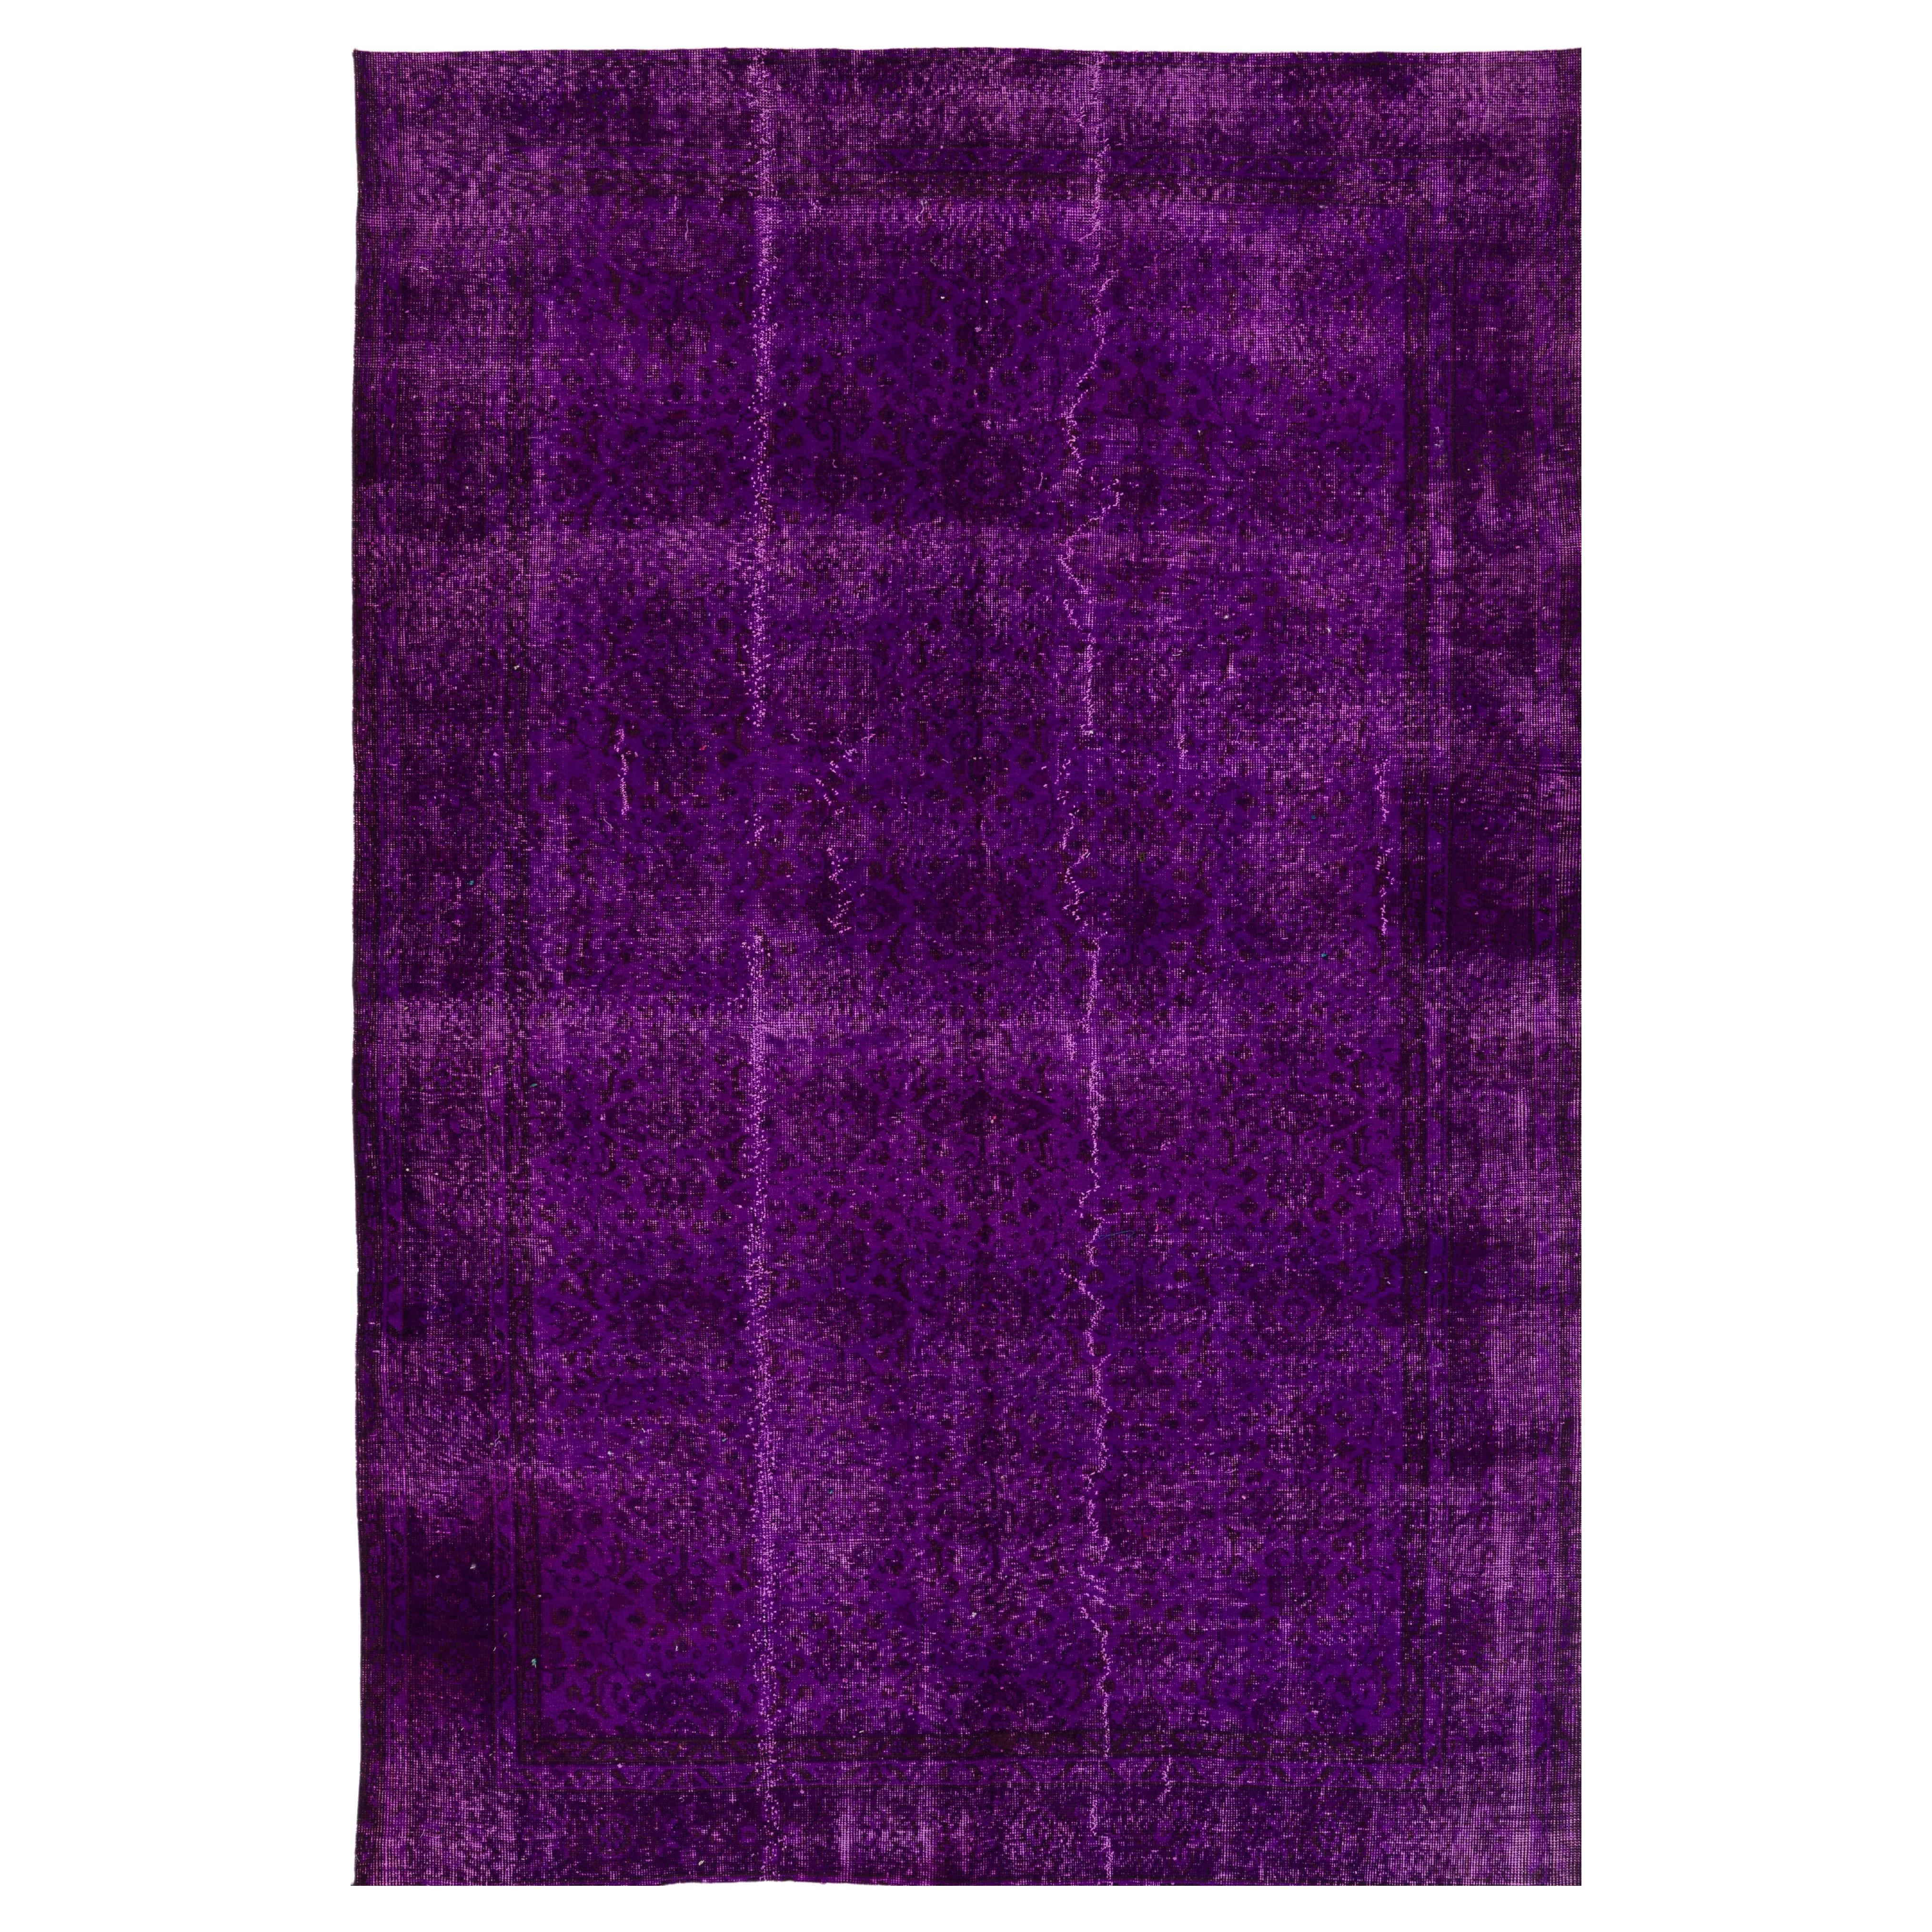 6.5x9.6 Ft Vintage Handmade Rug Over-Dyed in Purple, Great for Modern Interiors For Sale